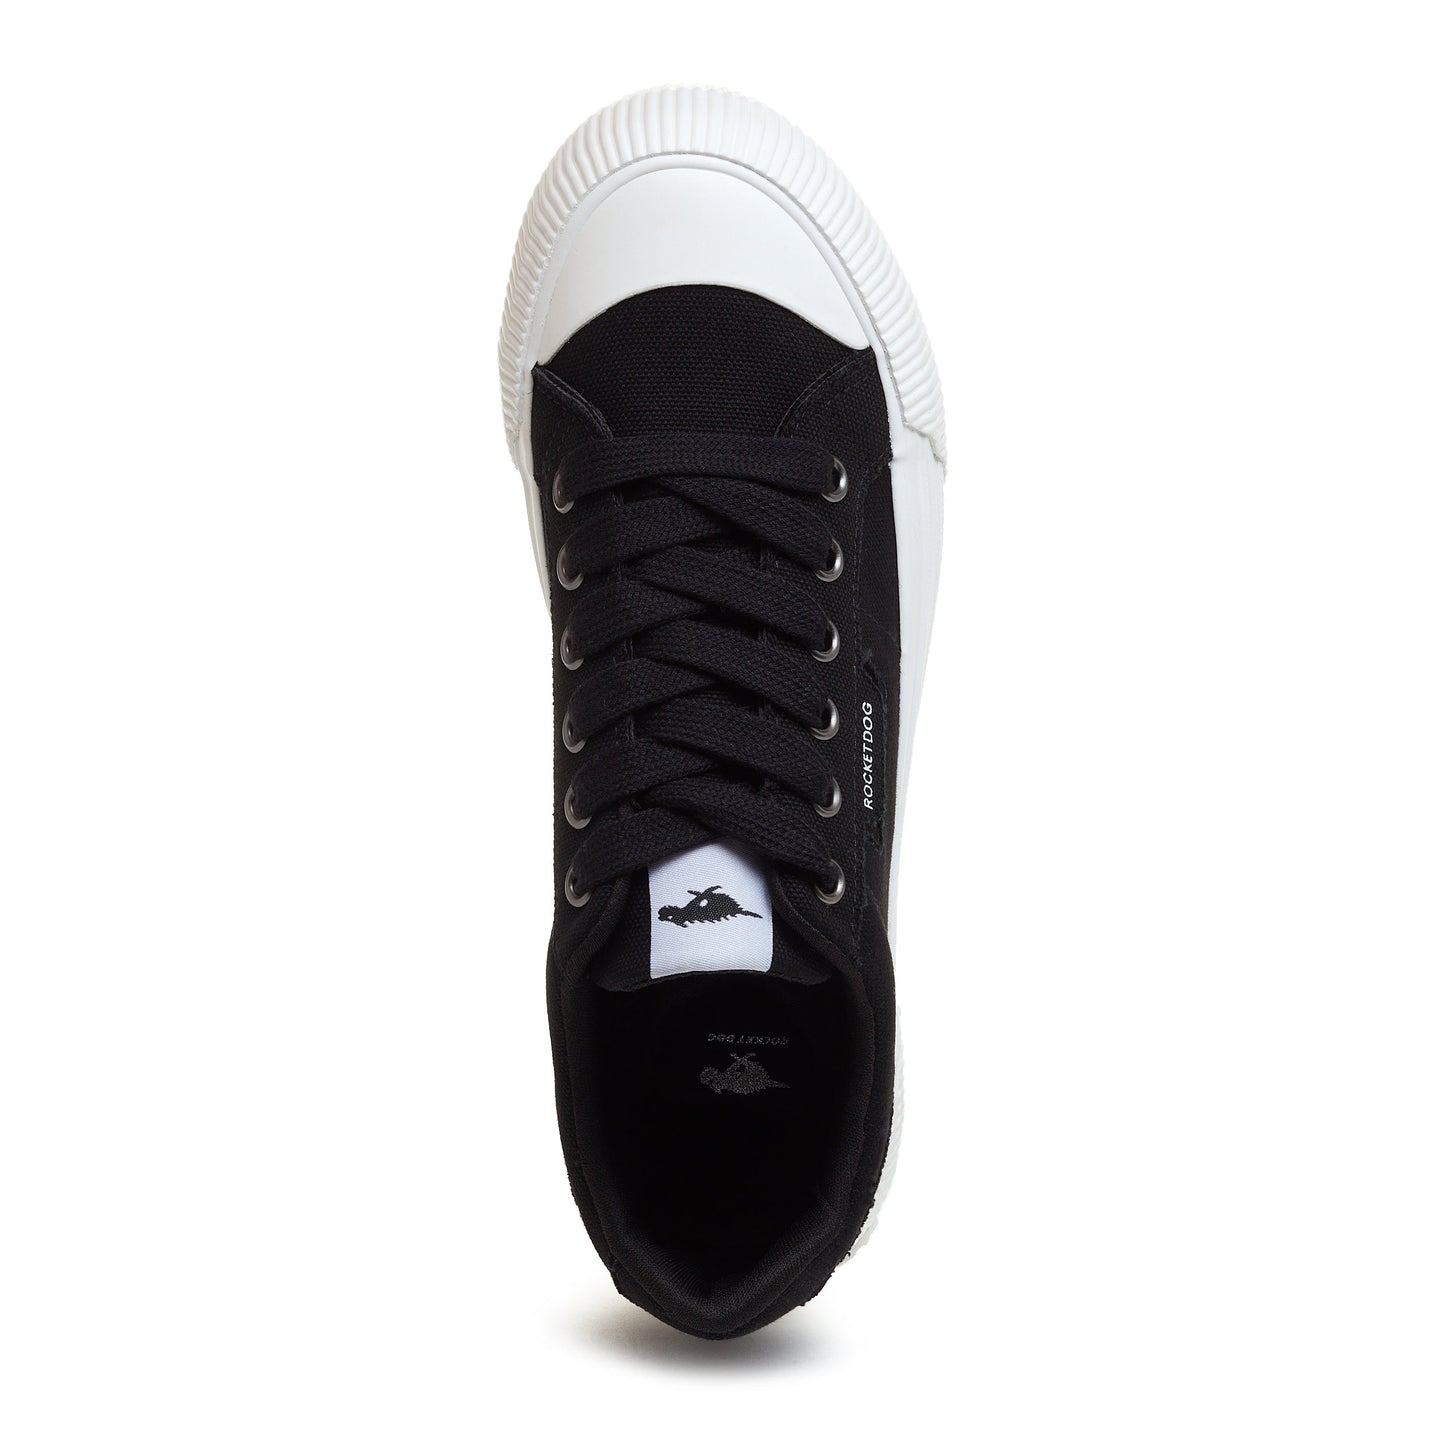 Cheery Black Sneakers: Classic Coolness by Rocket Dog